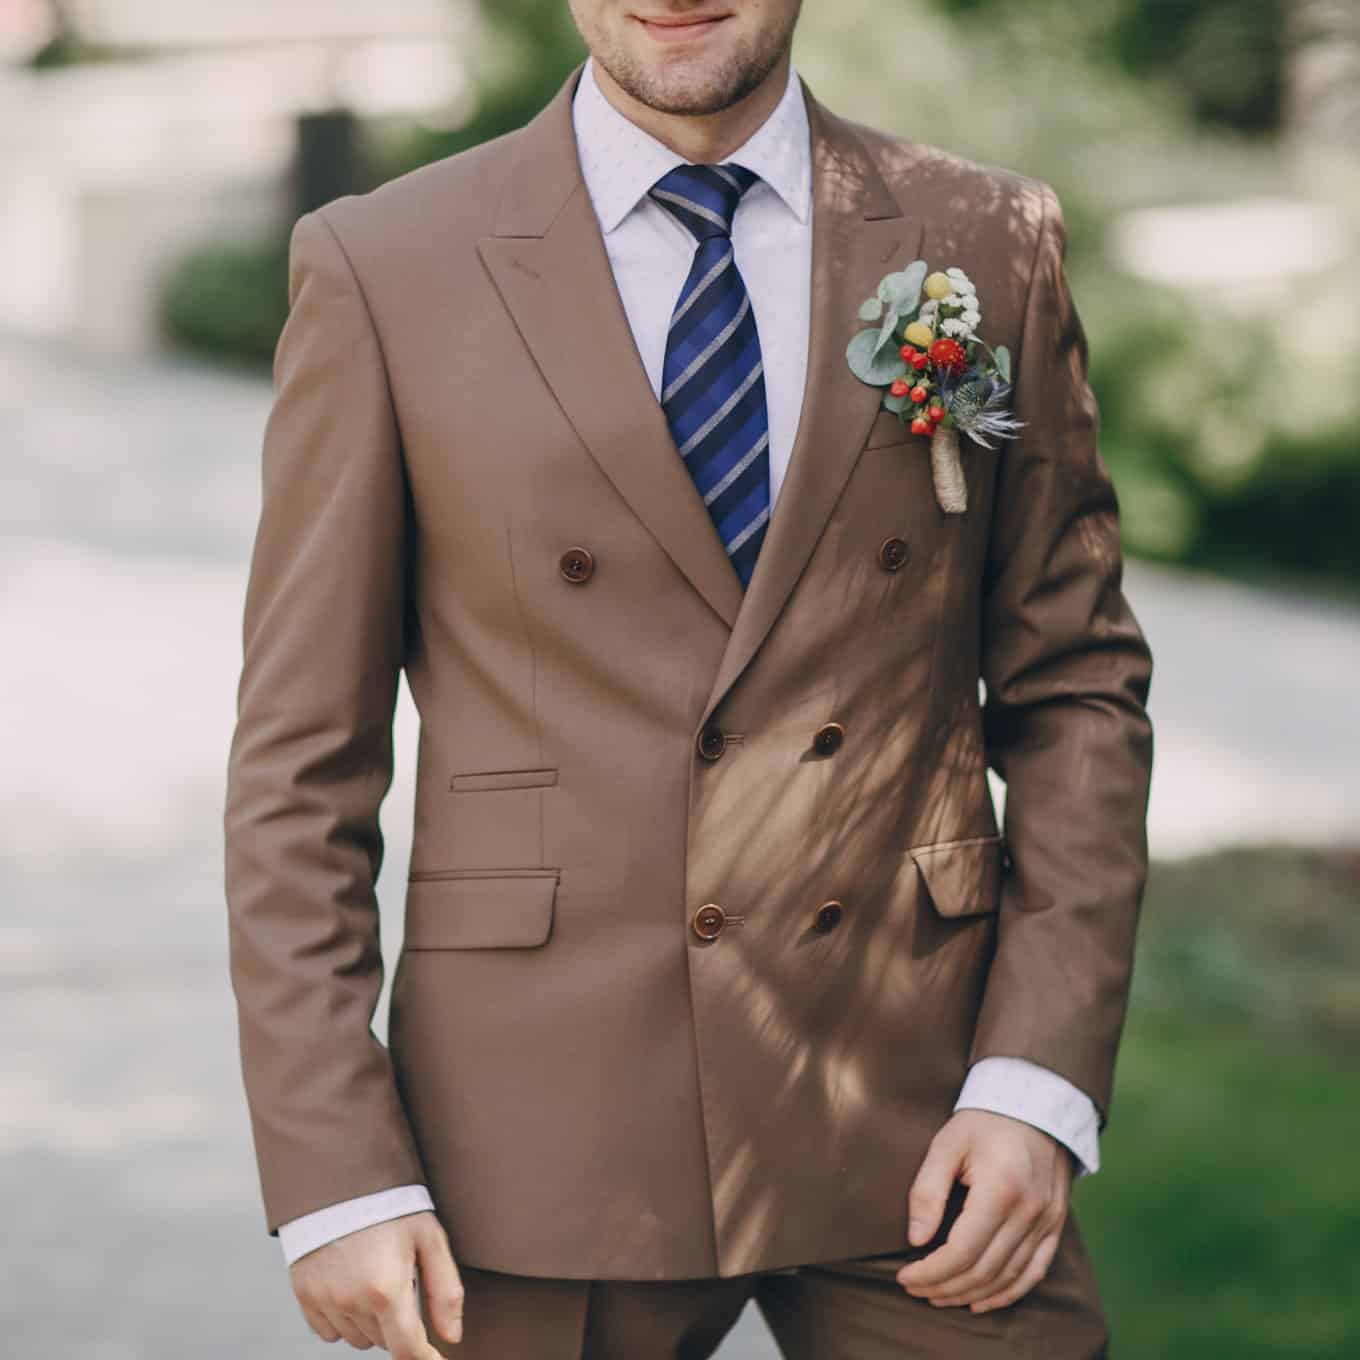 Earth Tone Wedding Suits